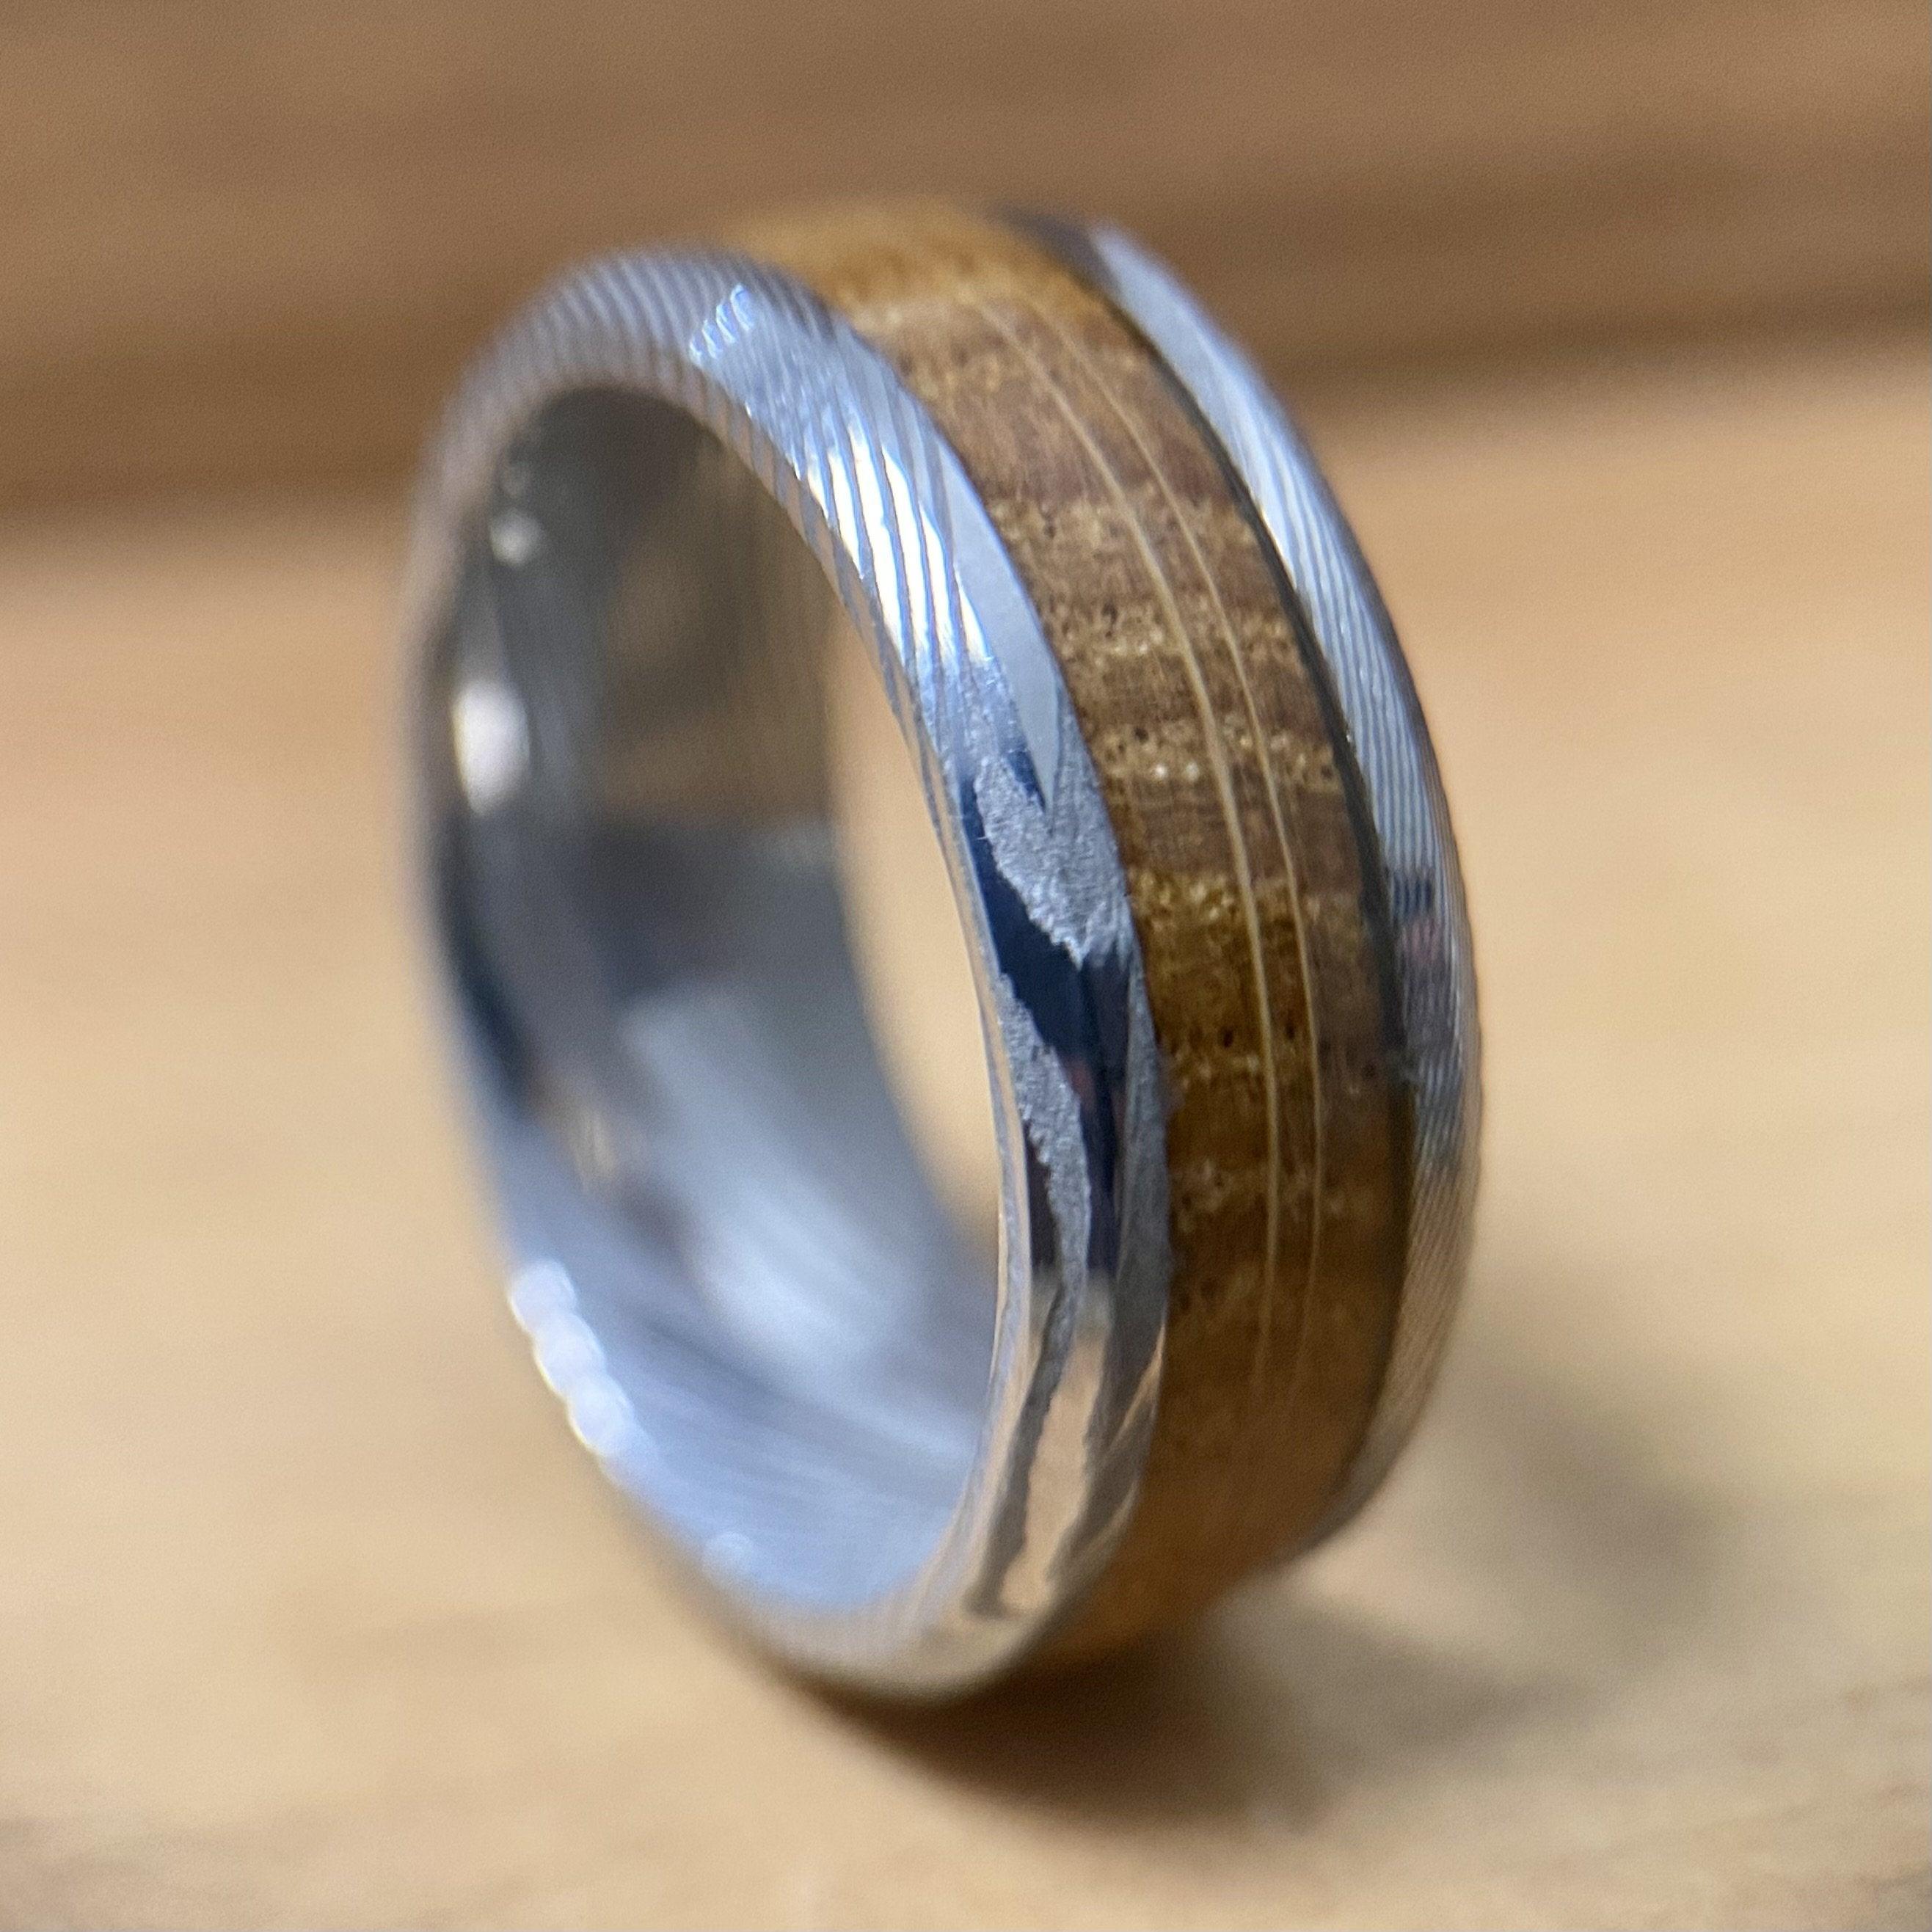 BW James Jewelers Wedding Band "The Rustic Warrior" Damascus Steel Design Ring With Wood From A Reclaimed Bourbon Whiskey Barrel